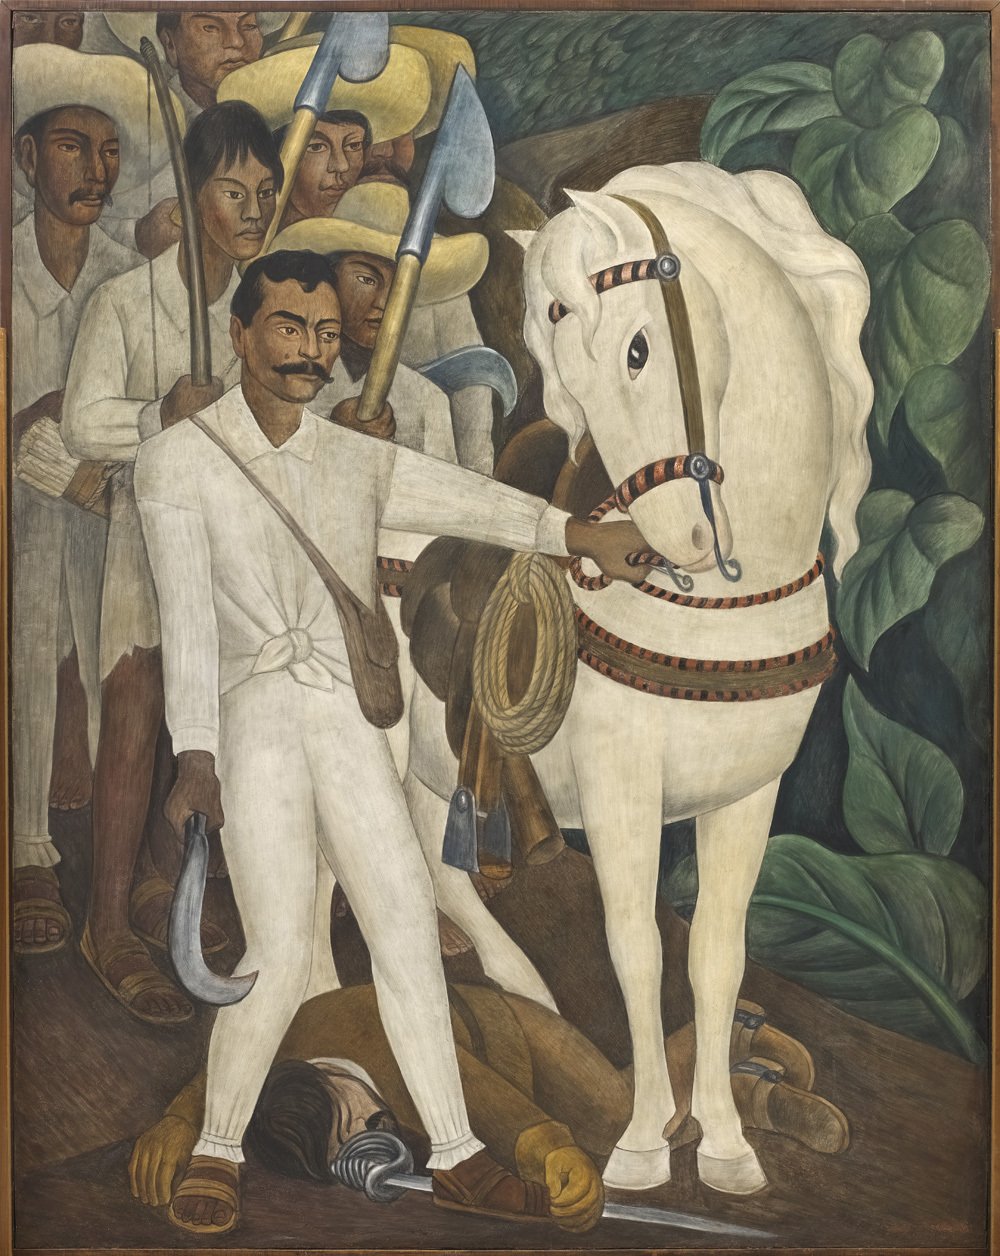 Diego Rivera.&nbsp;Agrarian Leader Zapata. 1931 The Museum of Modern Art, New York